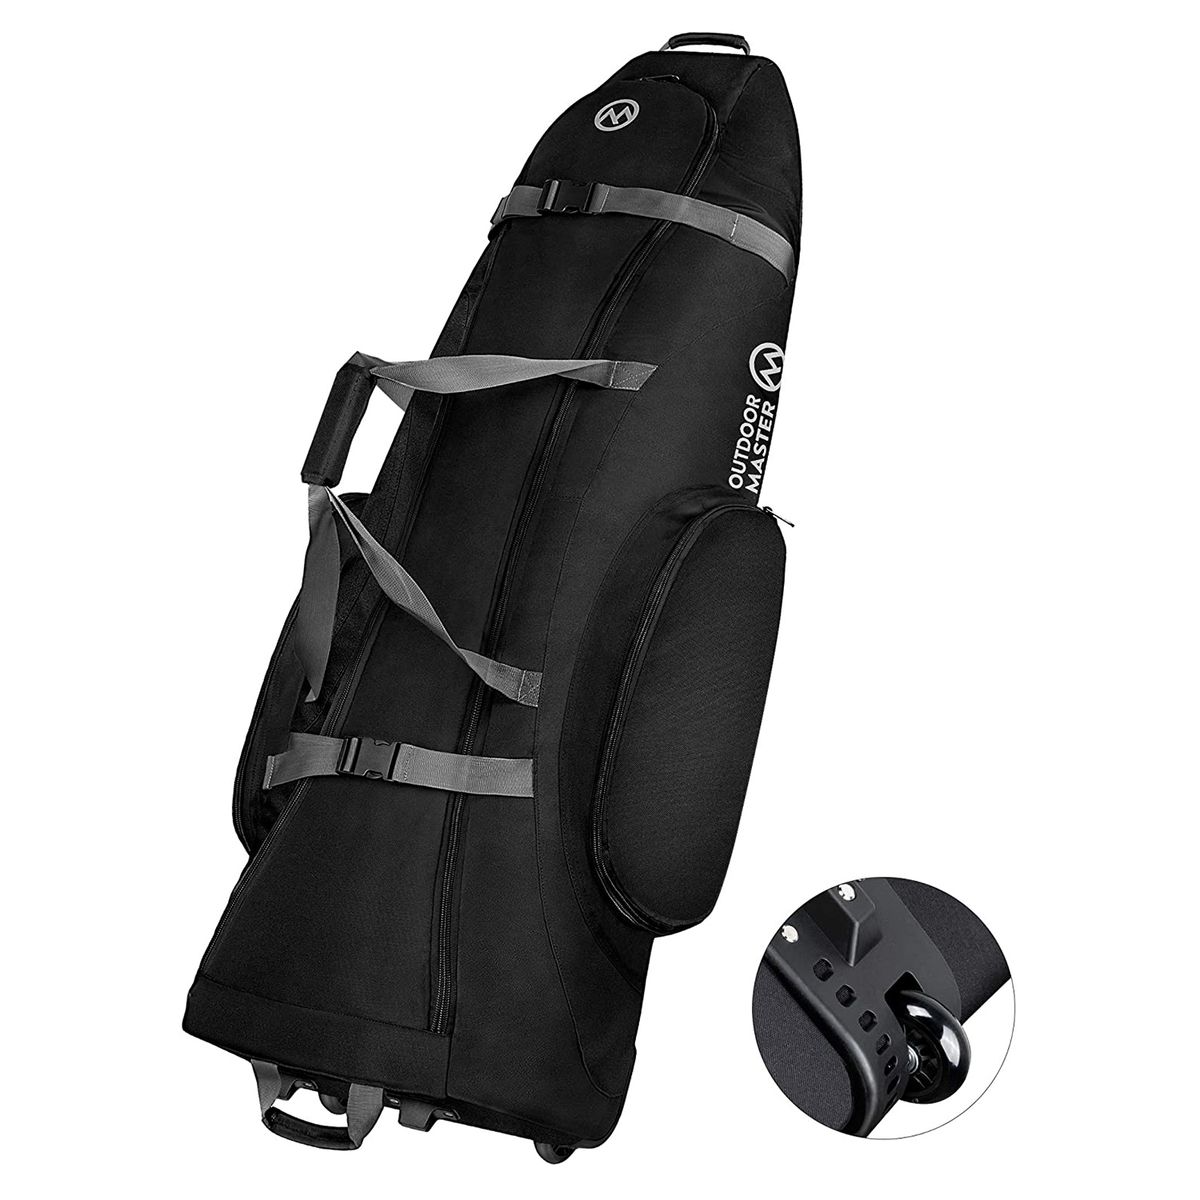 OutdoorMaster Padded Golf Club Travel Bag in Black